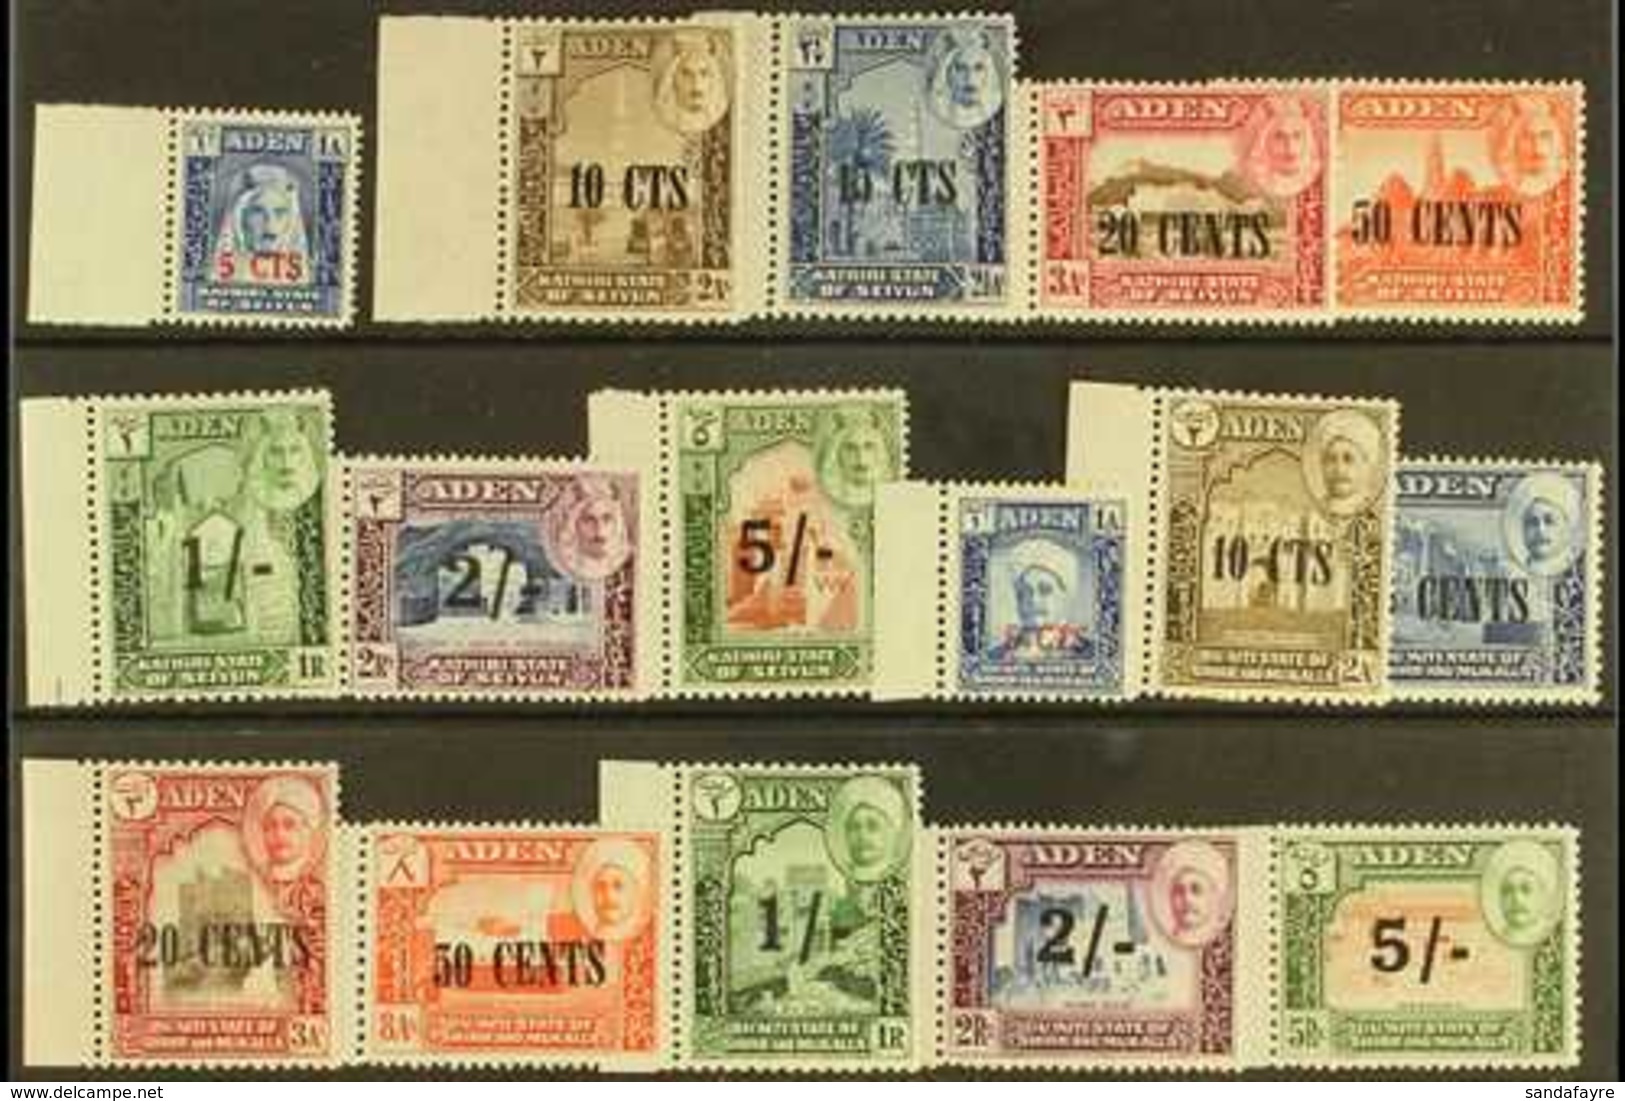 PROTECTORATE STATES  1951 Surcharge Sets, Seiyun SG 20/27 & Mukalla SG 20/27, Never Hinged Mint (16 Stamps) For More Ima - Aden (1854-1963)